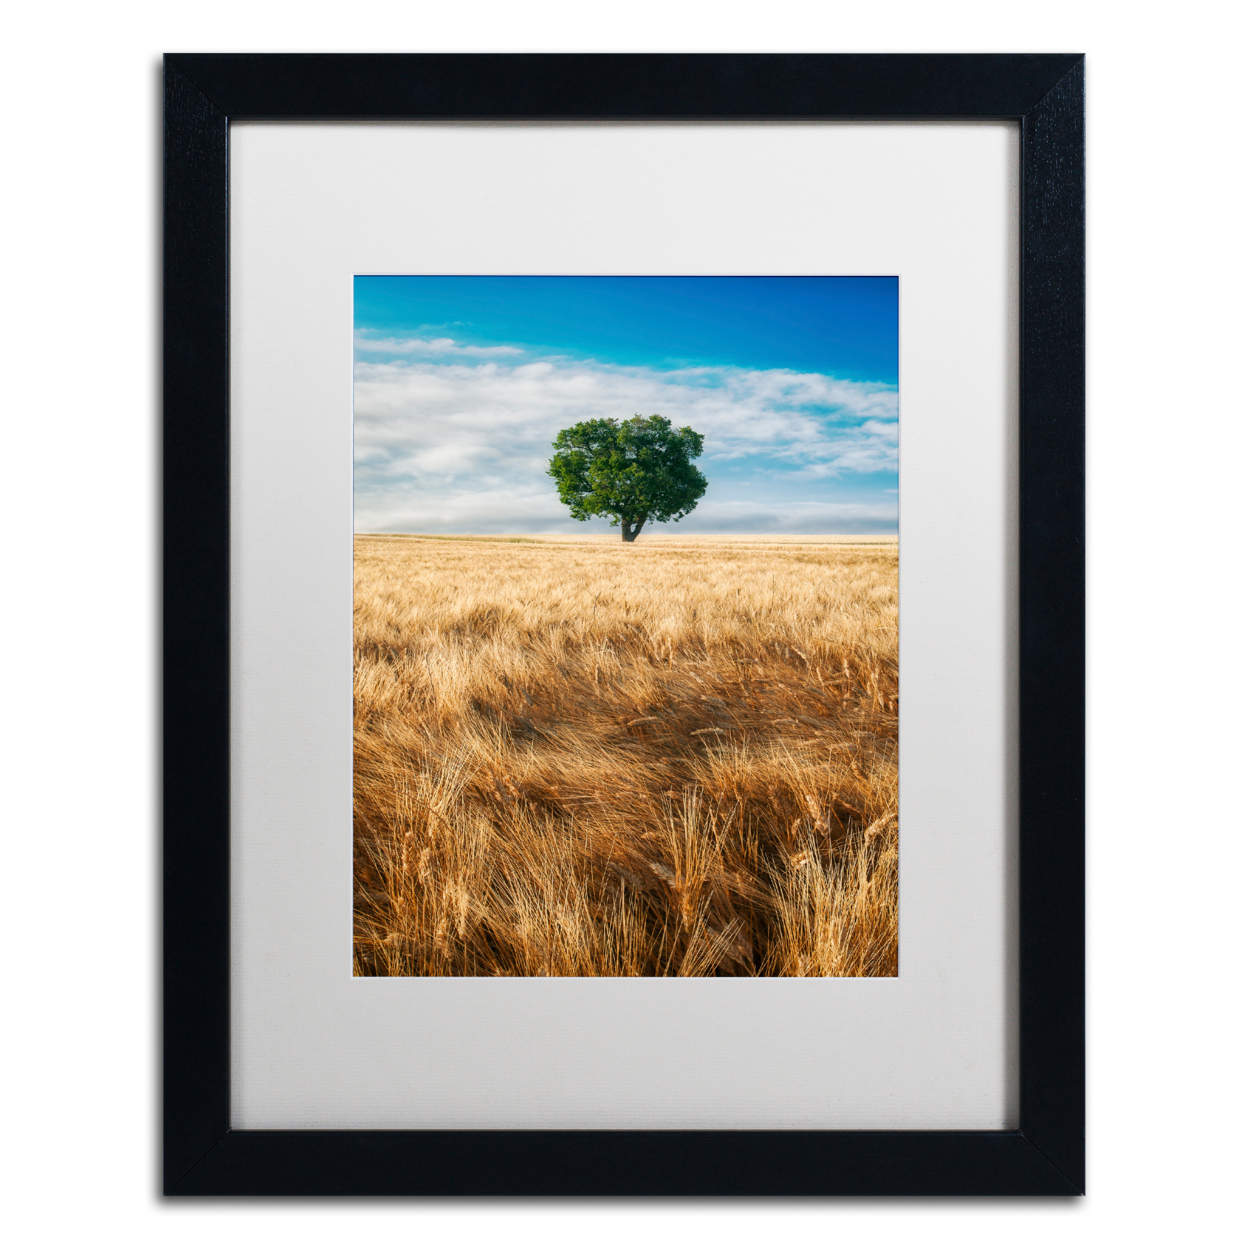 Michael Blanchette Photography 'Wheat Field Tree' Black Wooden Framed Art 18 X 22 Inches